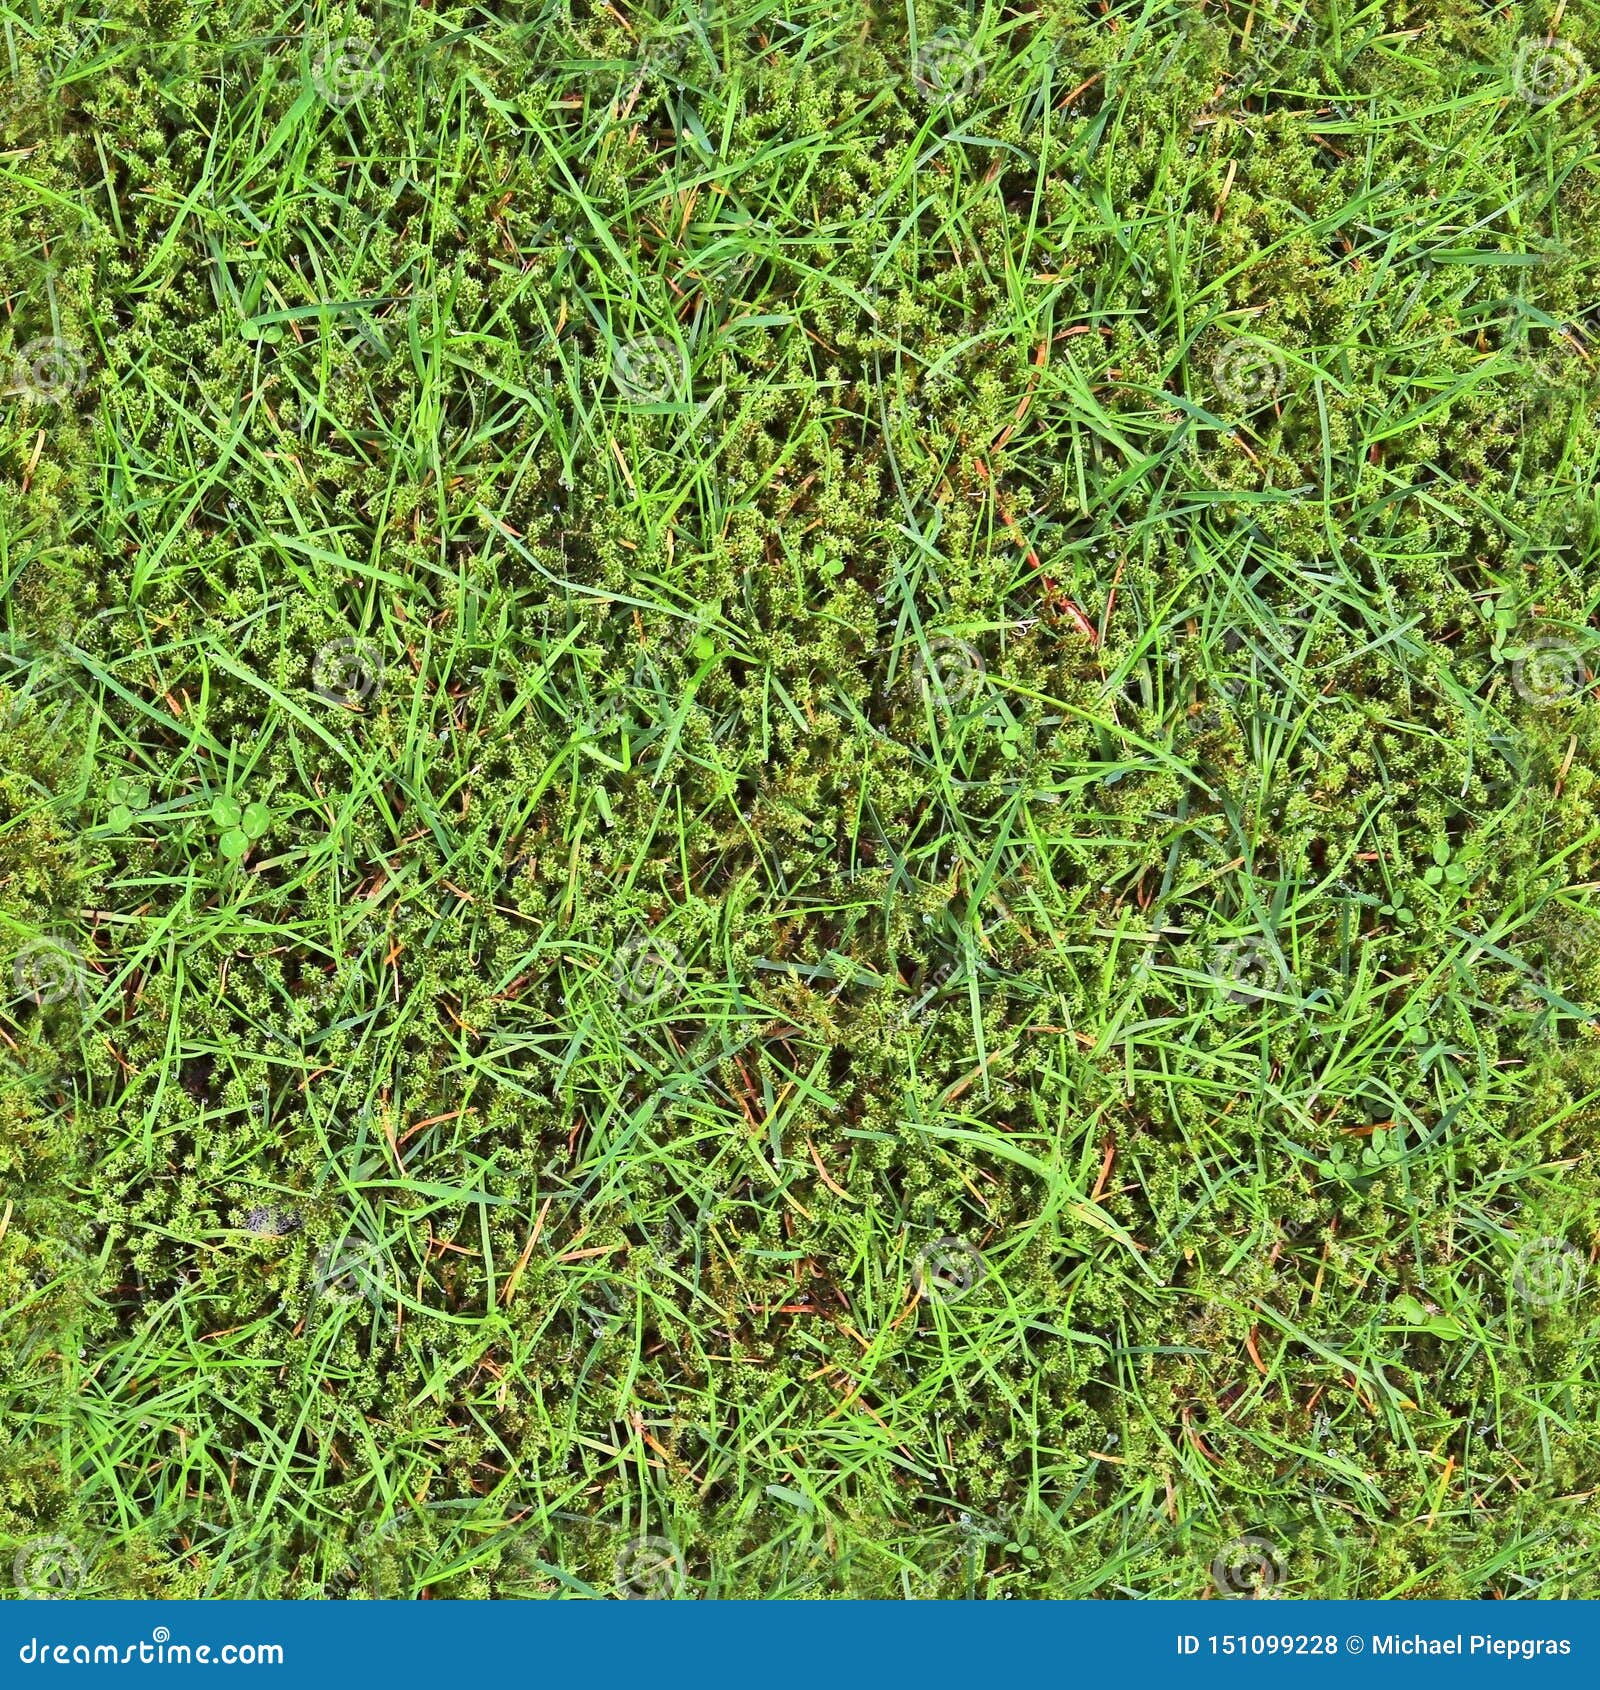 high resolution seemless texture of green grass and plants for 3d modelling with more than 6 megapixel in size